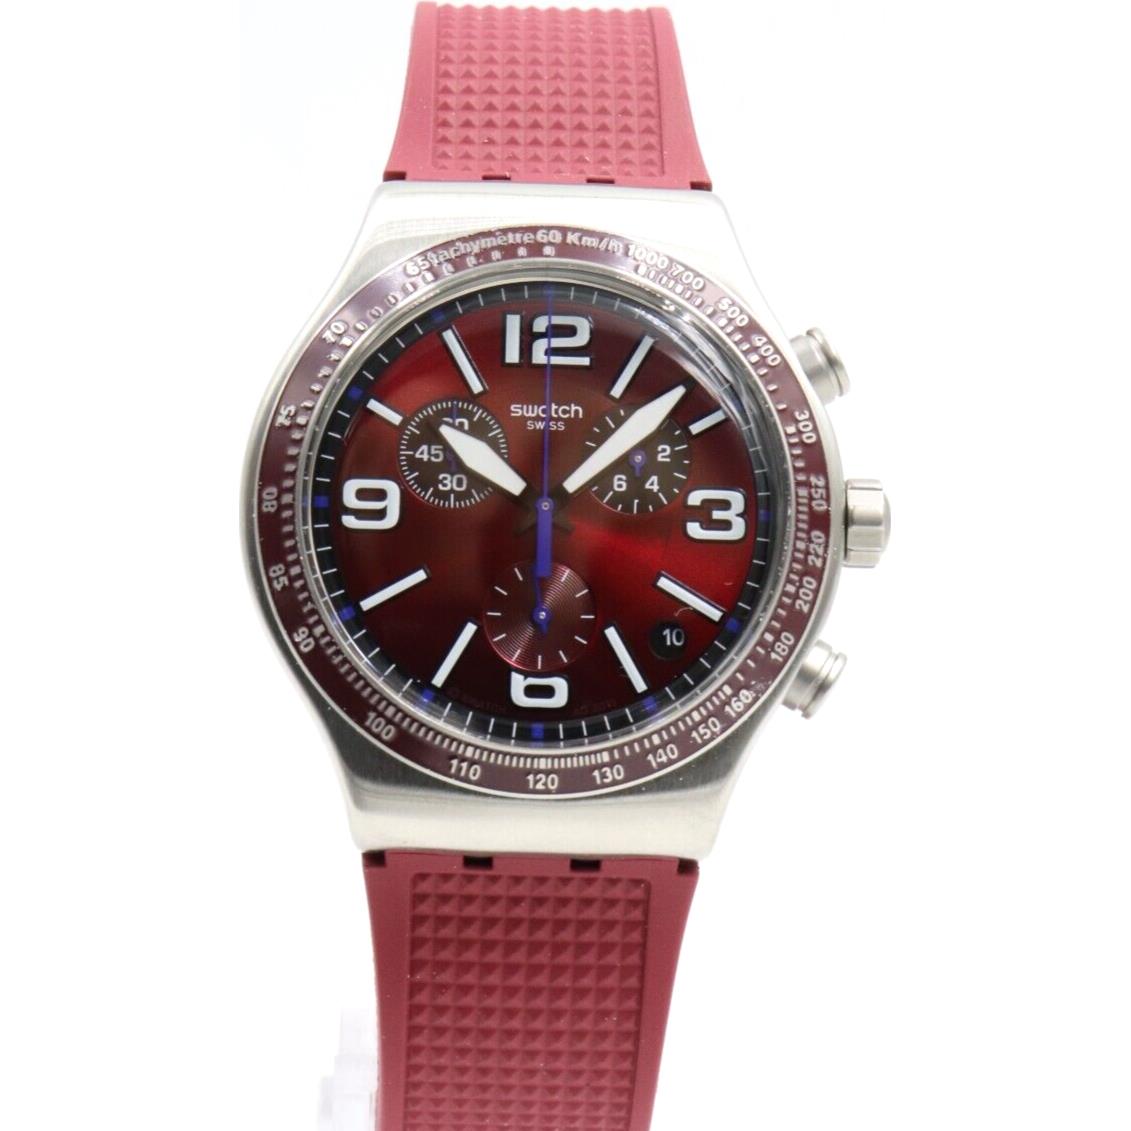 Swiss Swatch Irony Chrono Wine Grid Silicone Men Date Watch 44mm YVS464 - Dial: Red, Band: Red, Bezel: Red